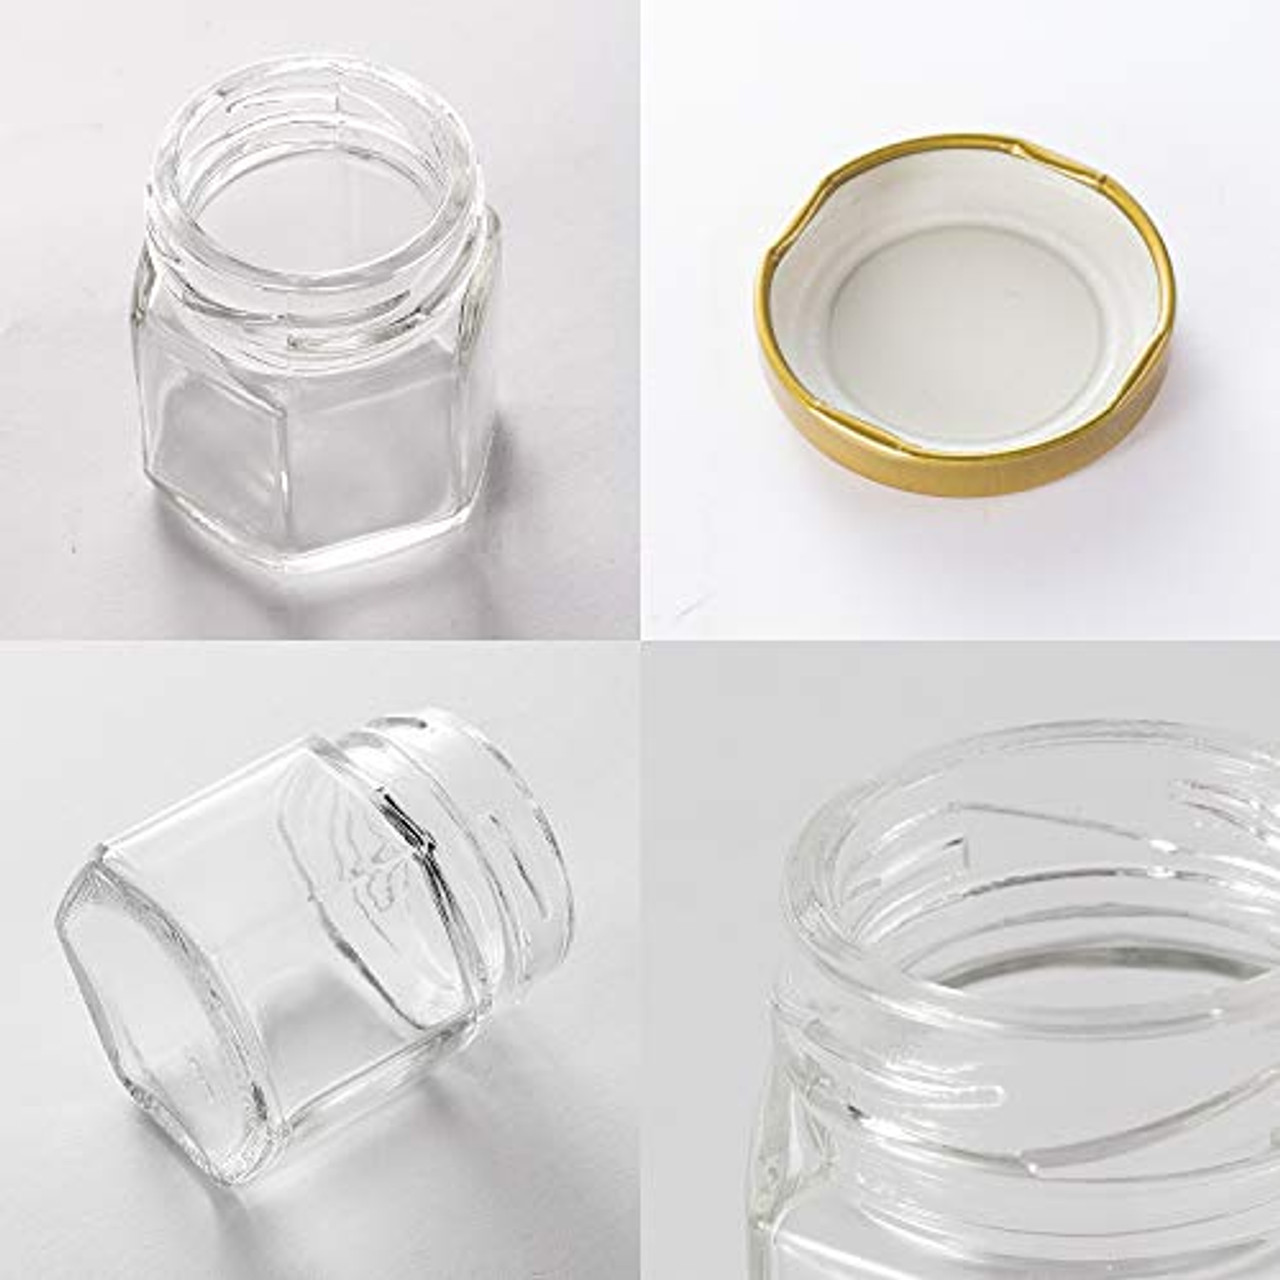 Encheng 8 OZ Glass Jars with Metal Lids,Clear Round Empty Candle Jars with  Airtight Lids,Small Mason Canning Jars for Food,Candle,Honey,Candy,30 Pack.